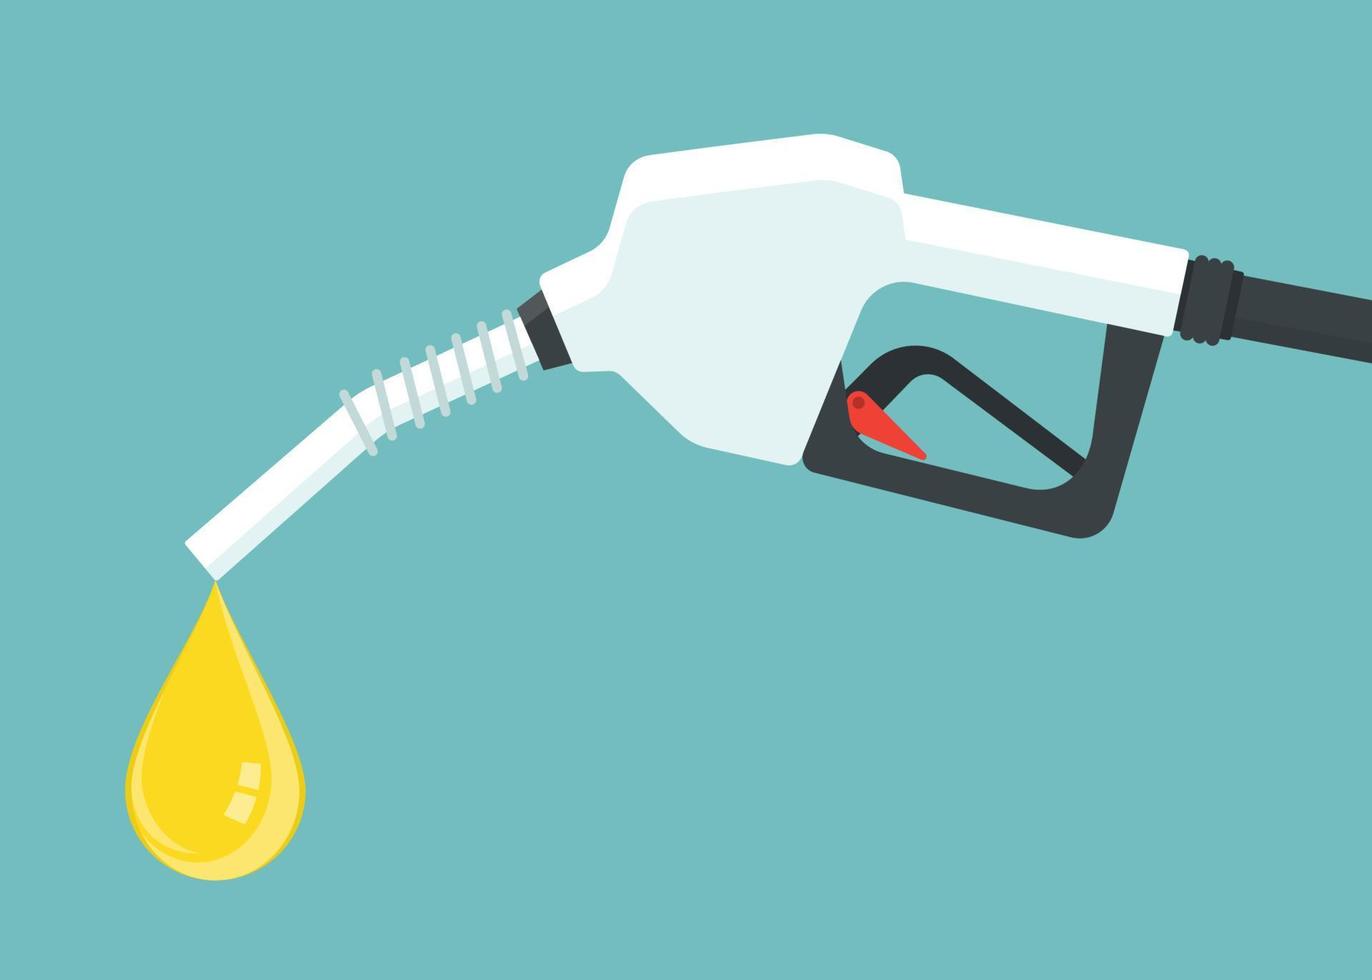 Gasoline pump nozzle with oil dripping. Vector illustration